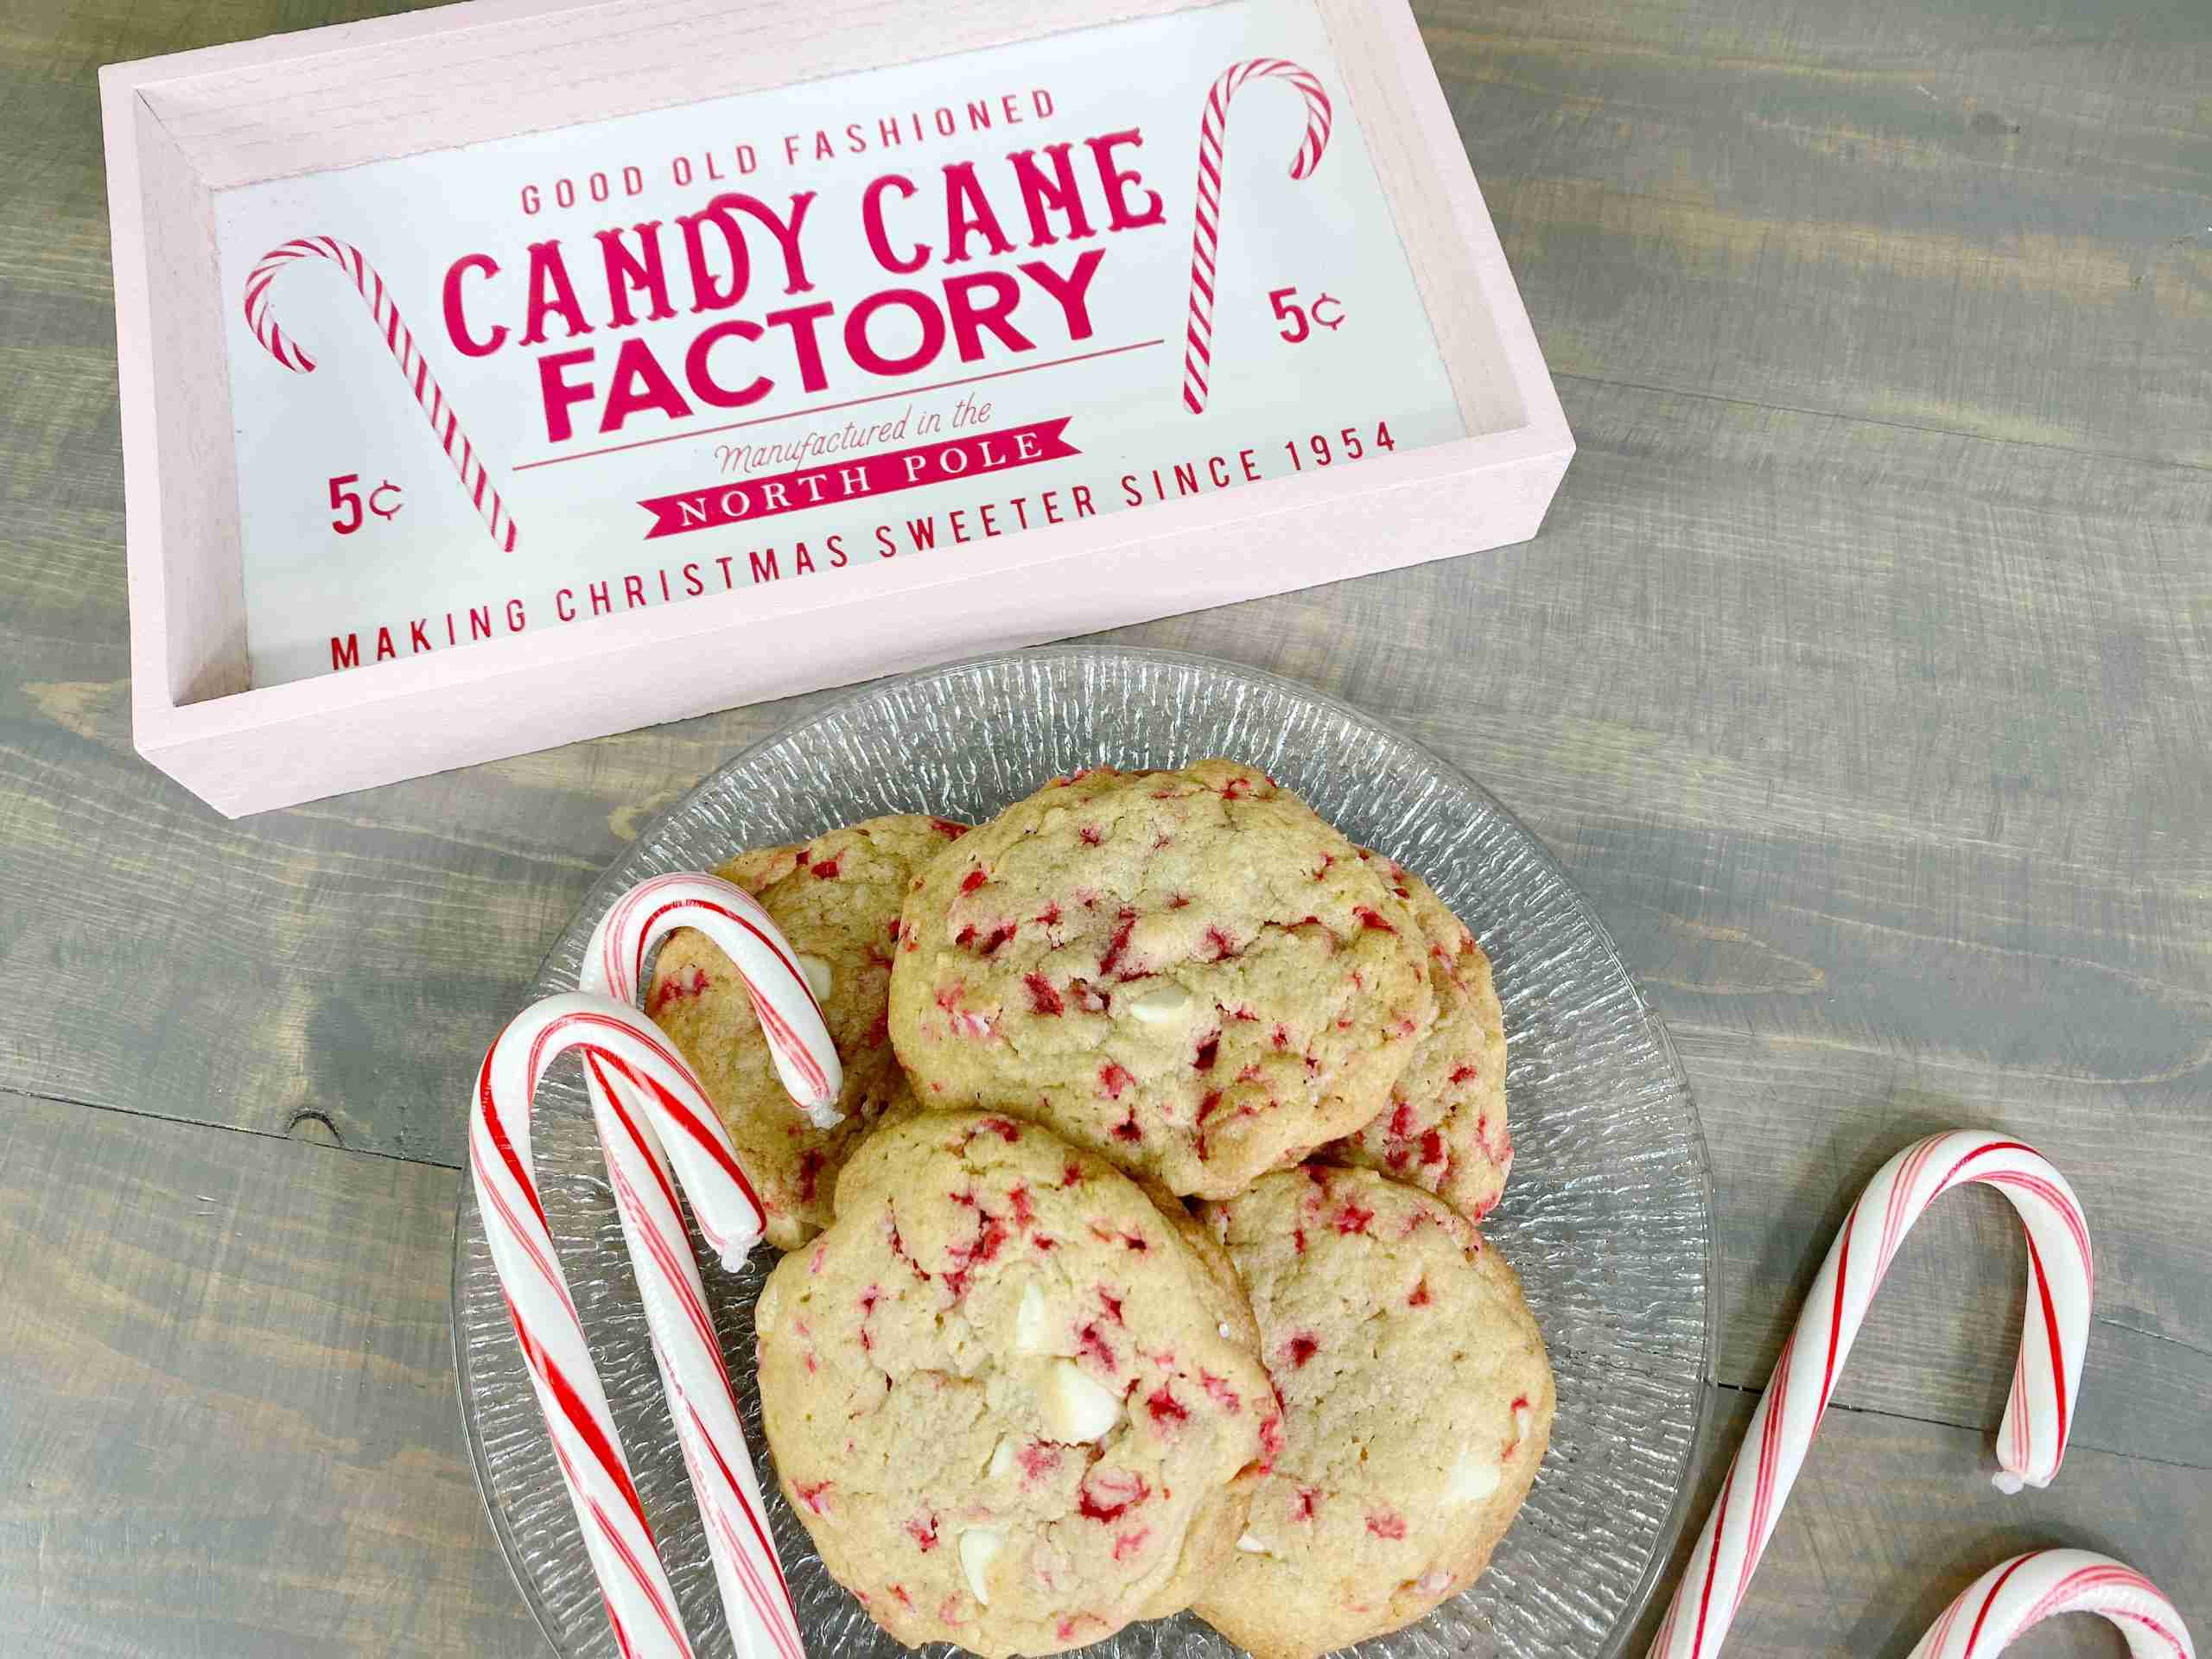 Candy cane cookies and peppermint with Target Christmas sign